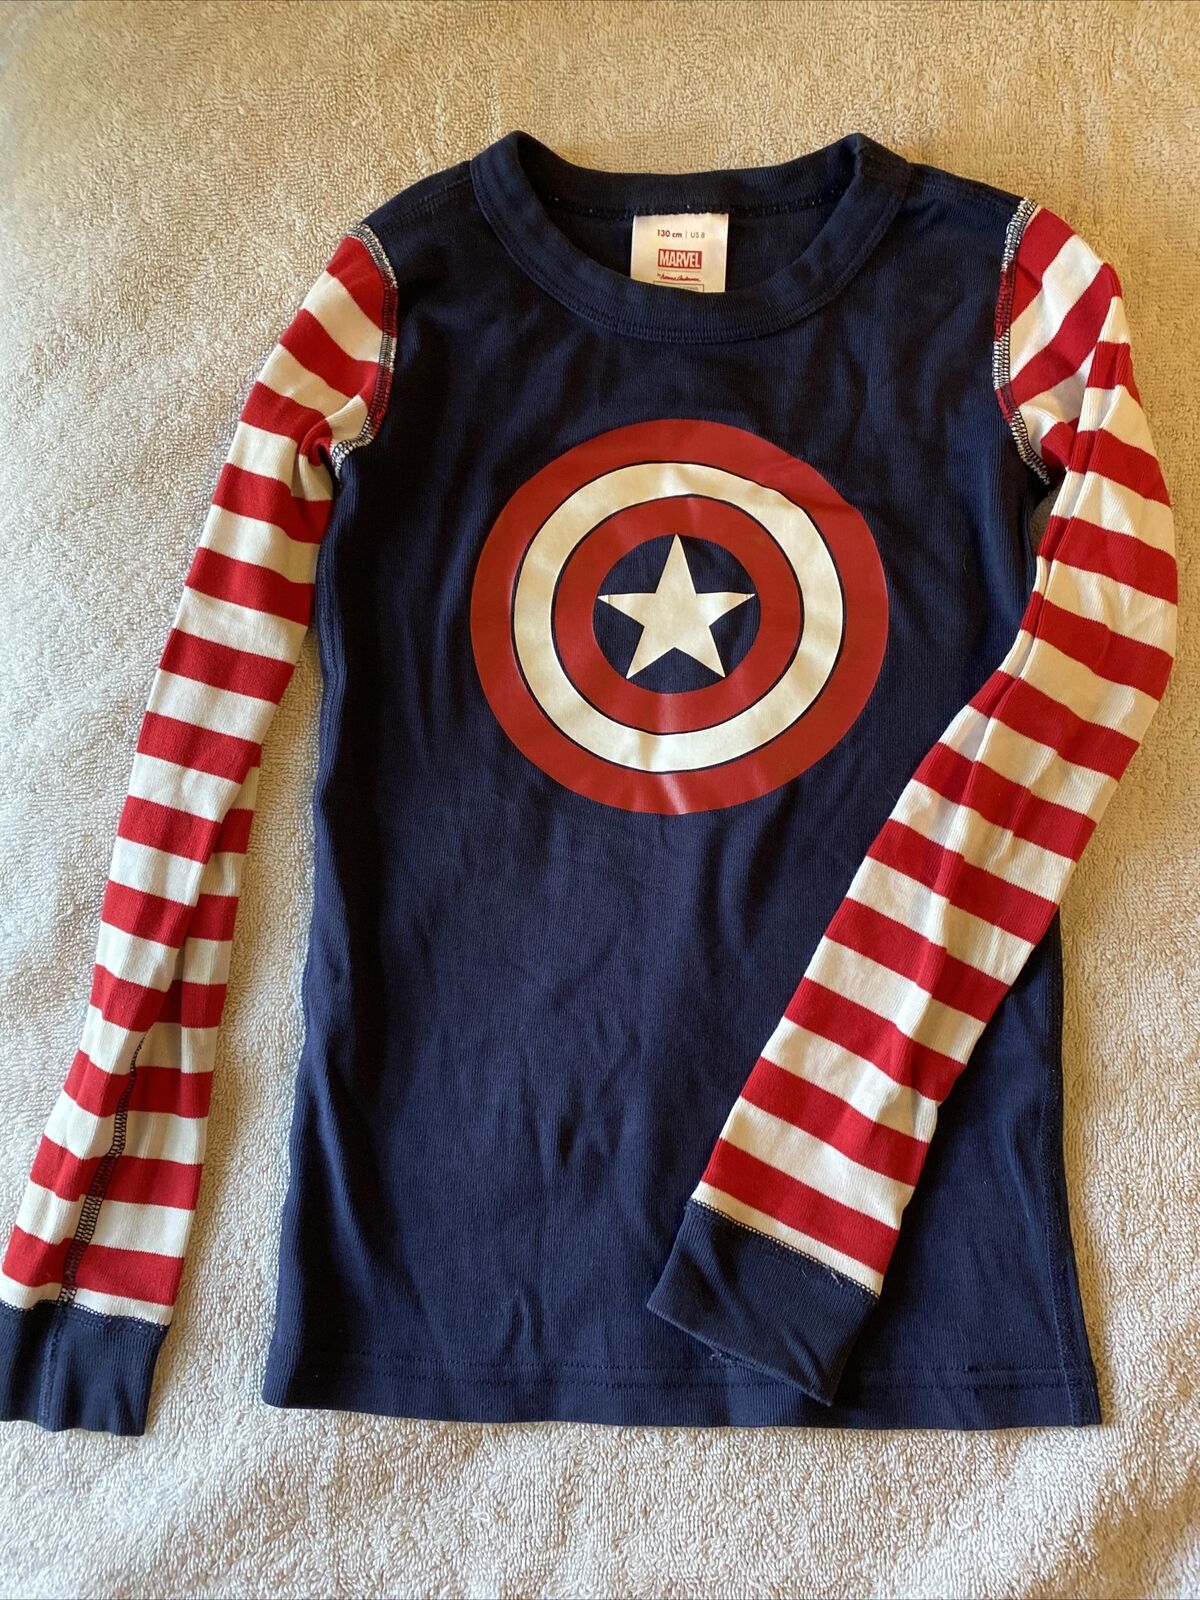 Hanna Andersson Captain America Marvel Pj Top Only 100% Cotton Costume Guc Shirt